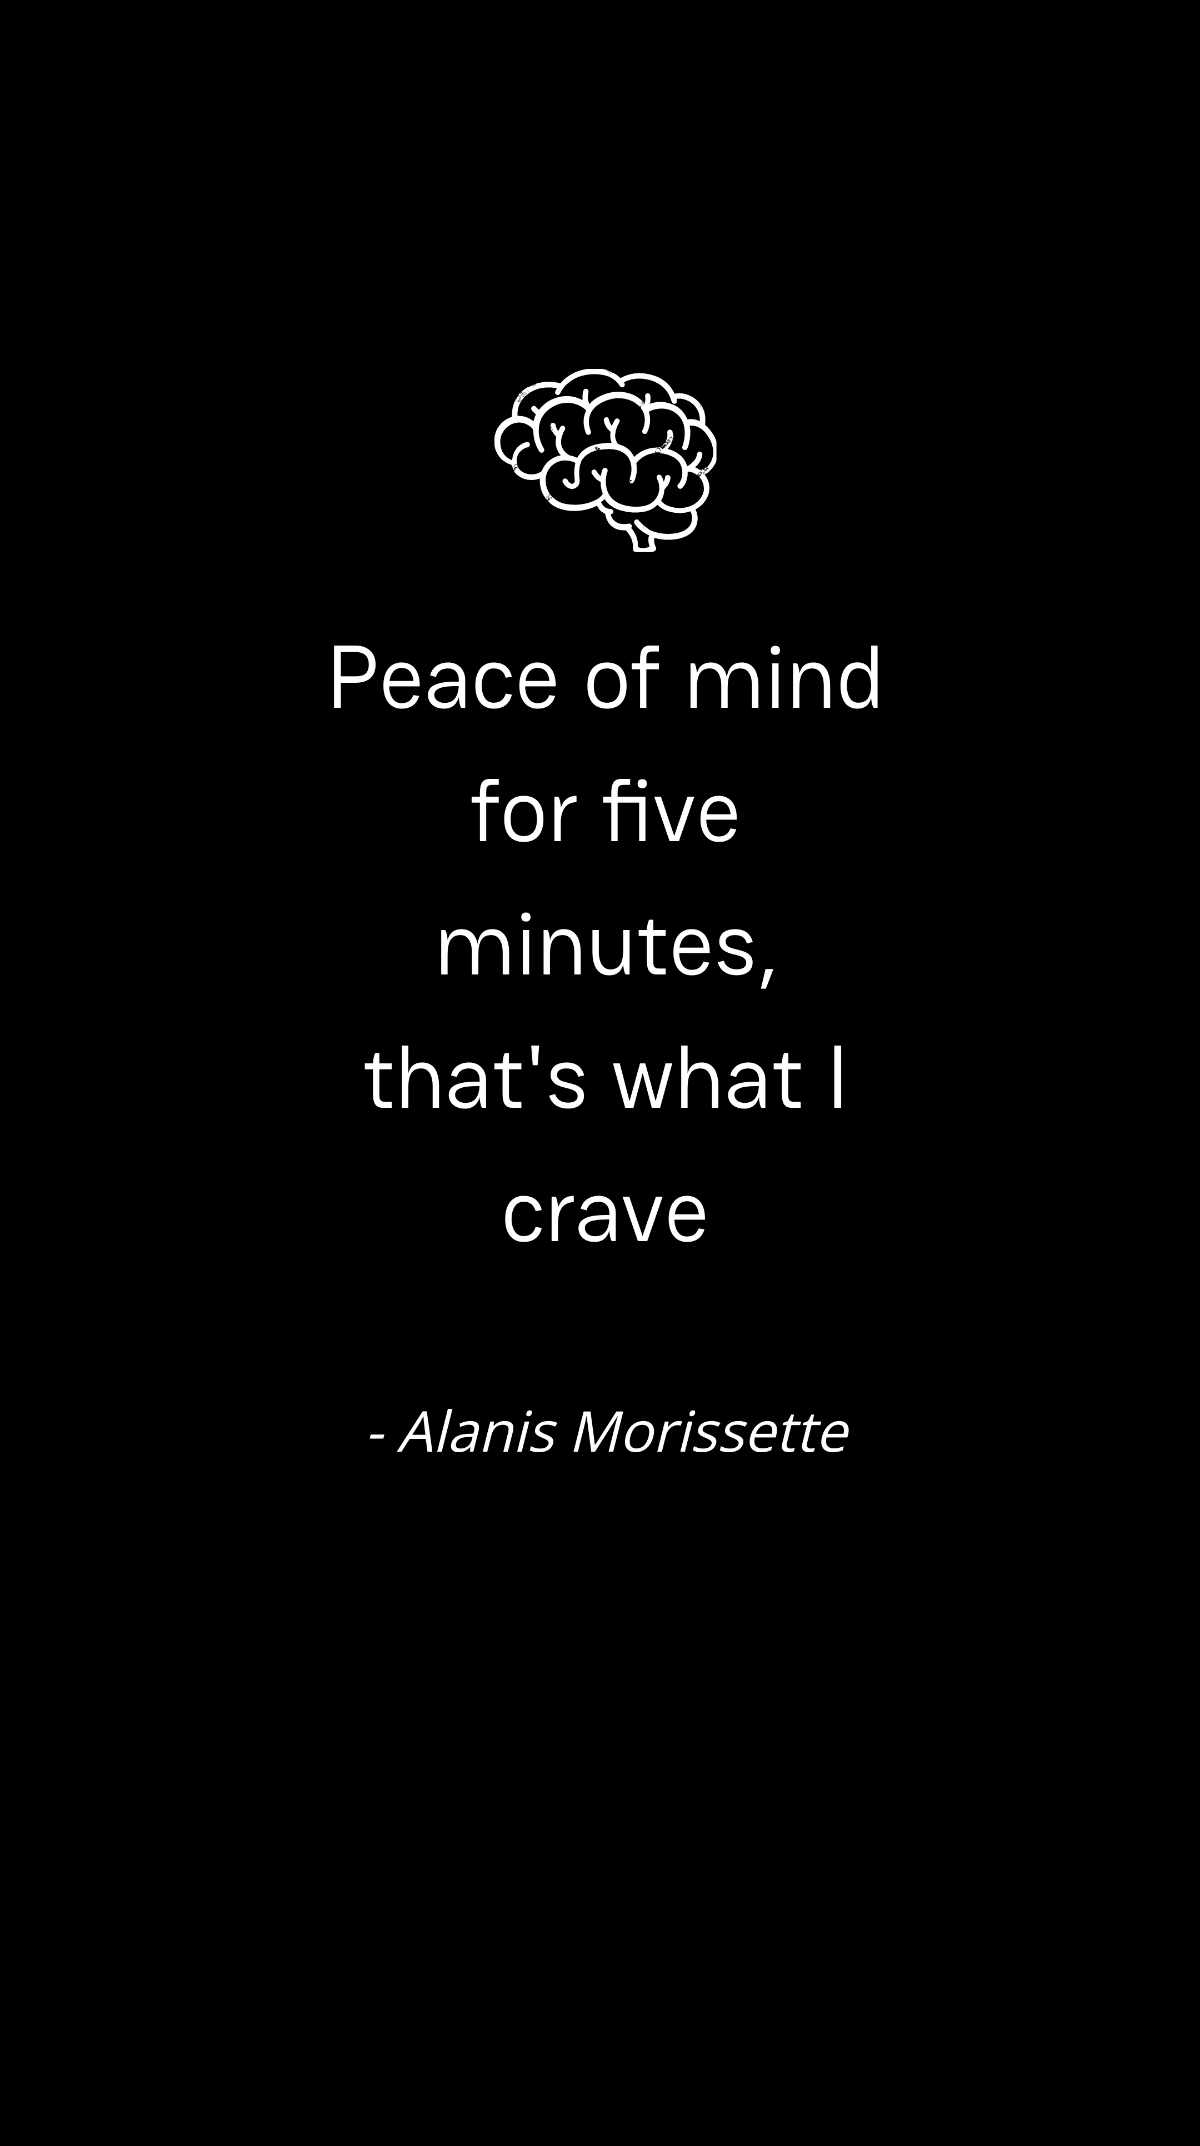 Alanis Morissette - Peace of mind for five minutes, that's what I crave Template